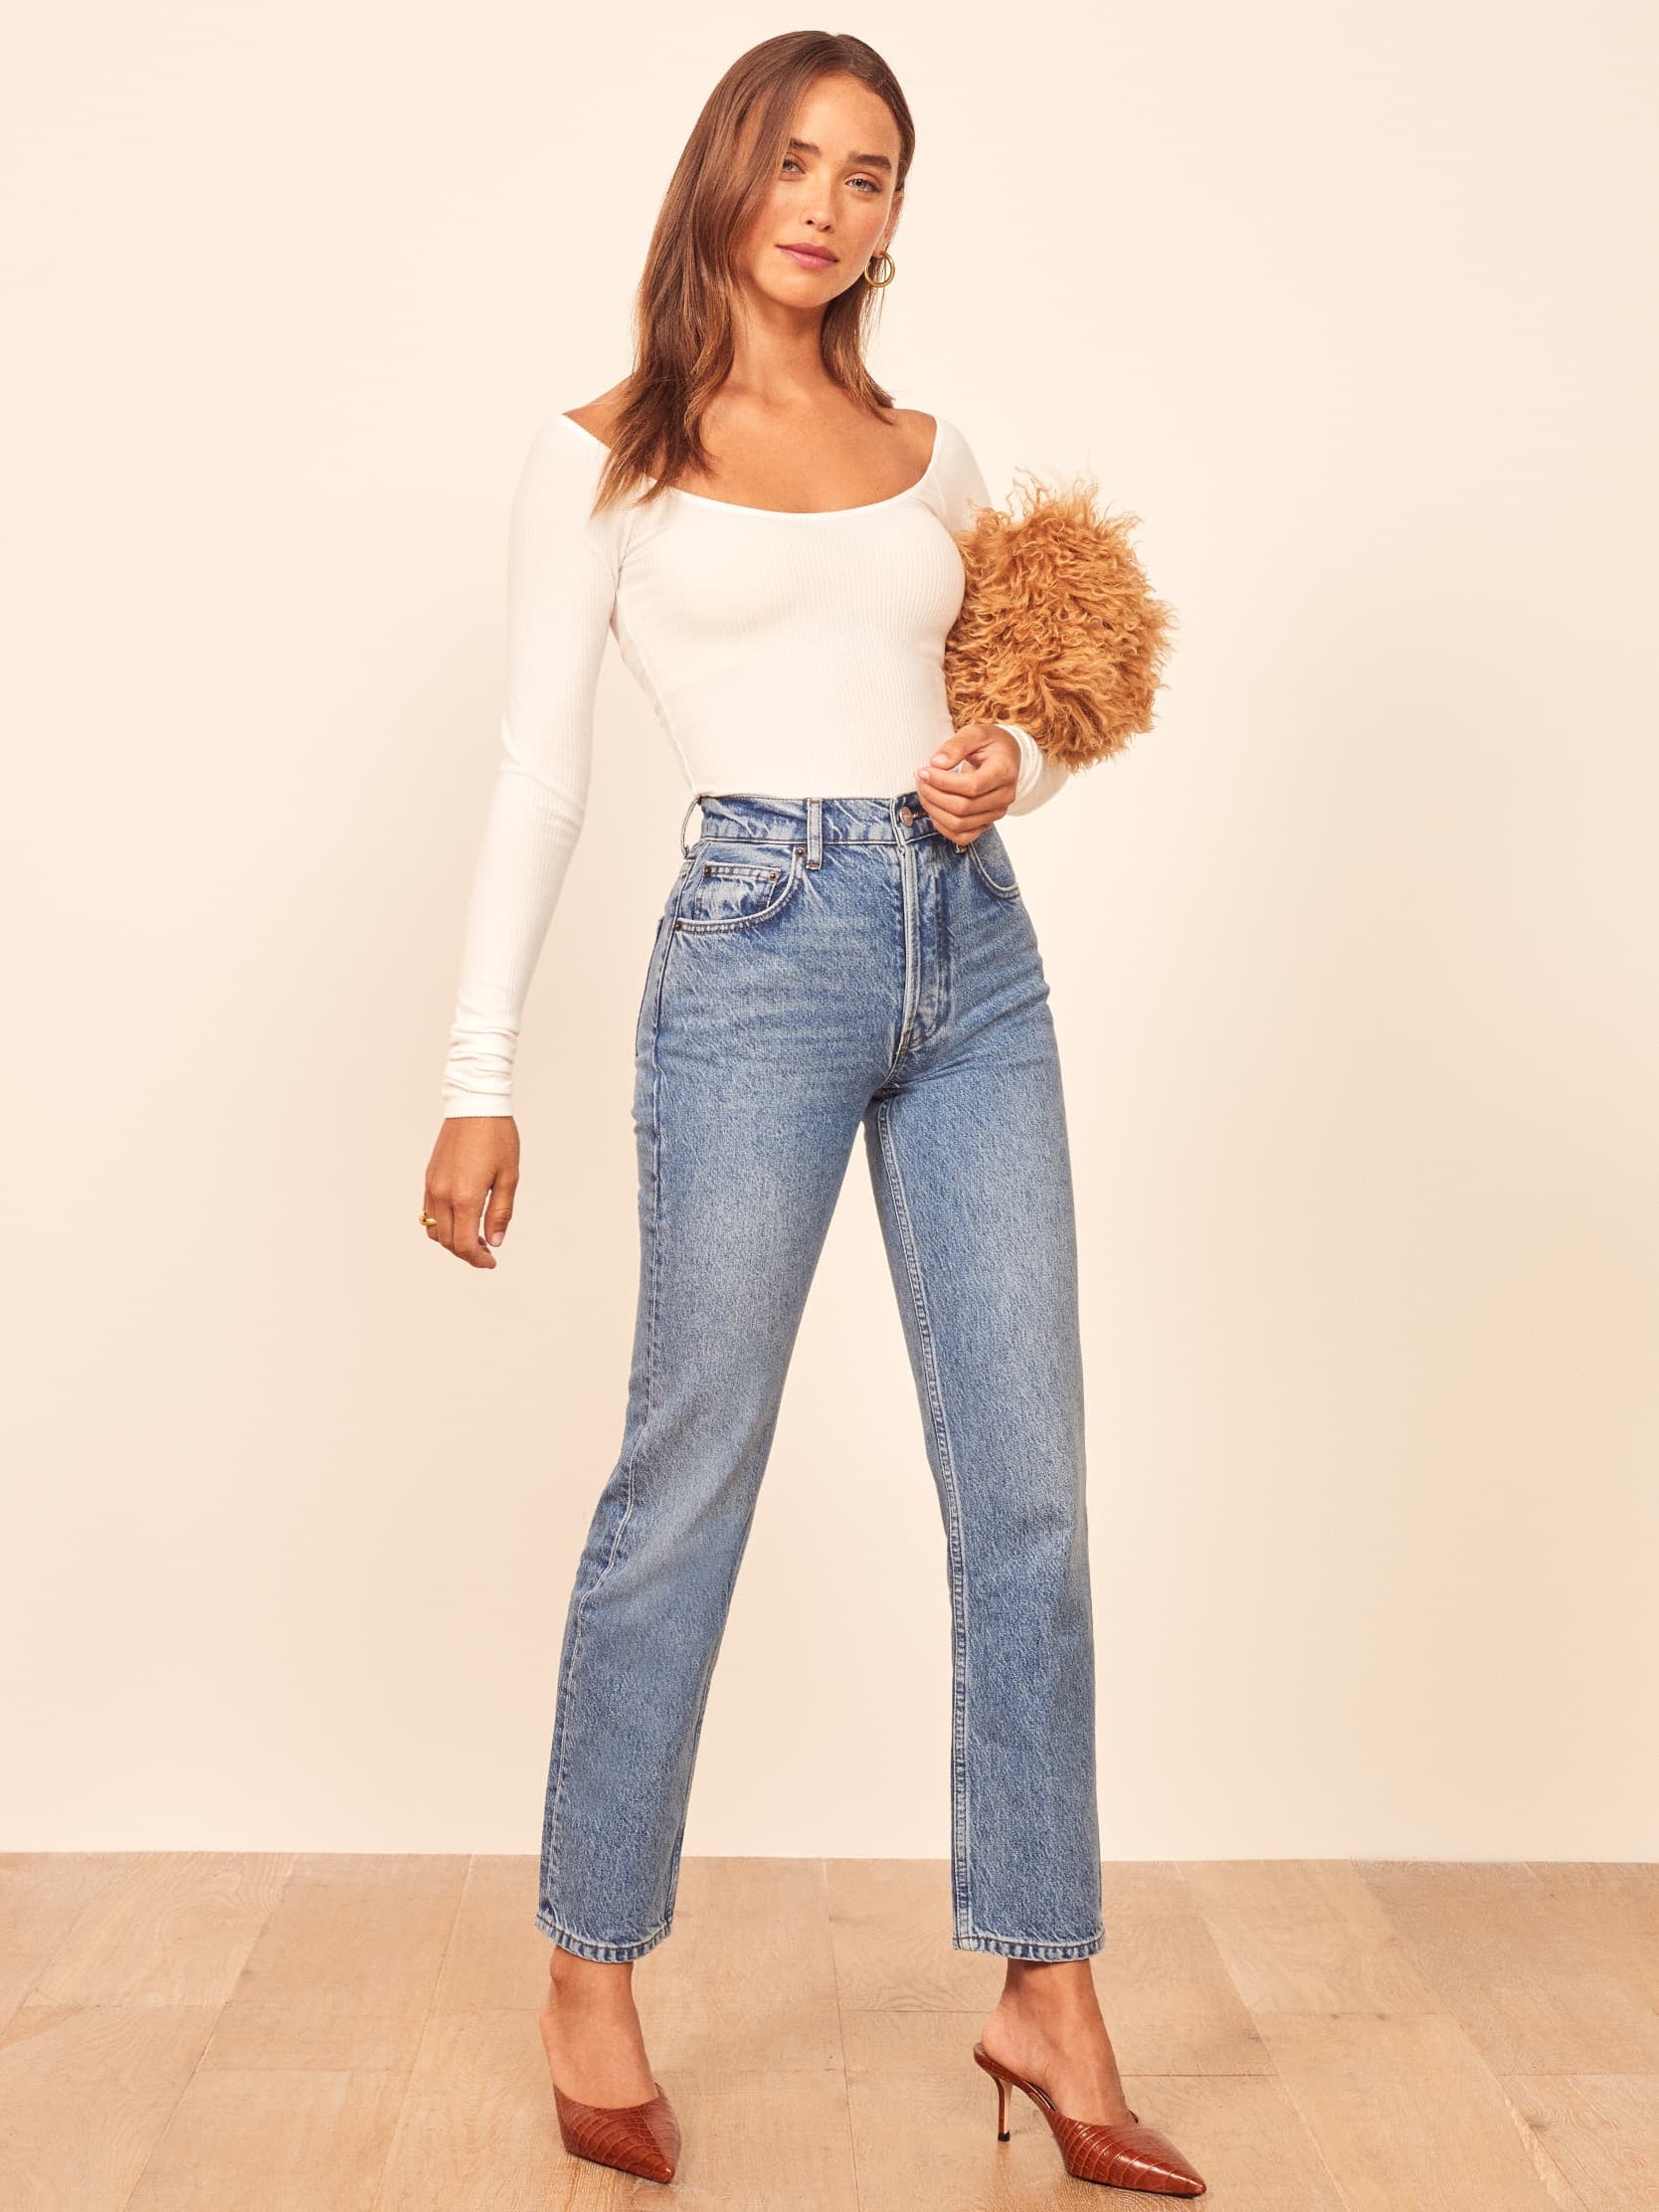 Reformation Cynthia High Relaxed Jean Review | vlr.eng.br